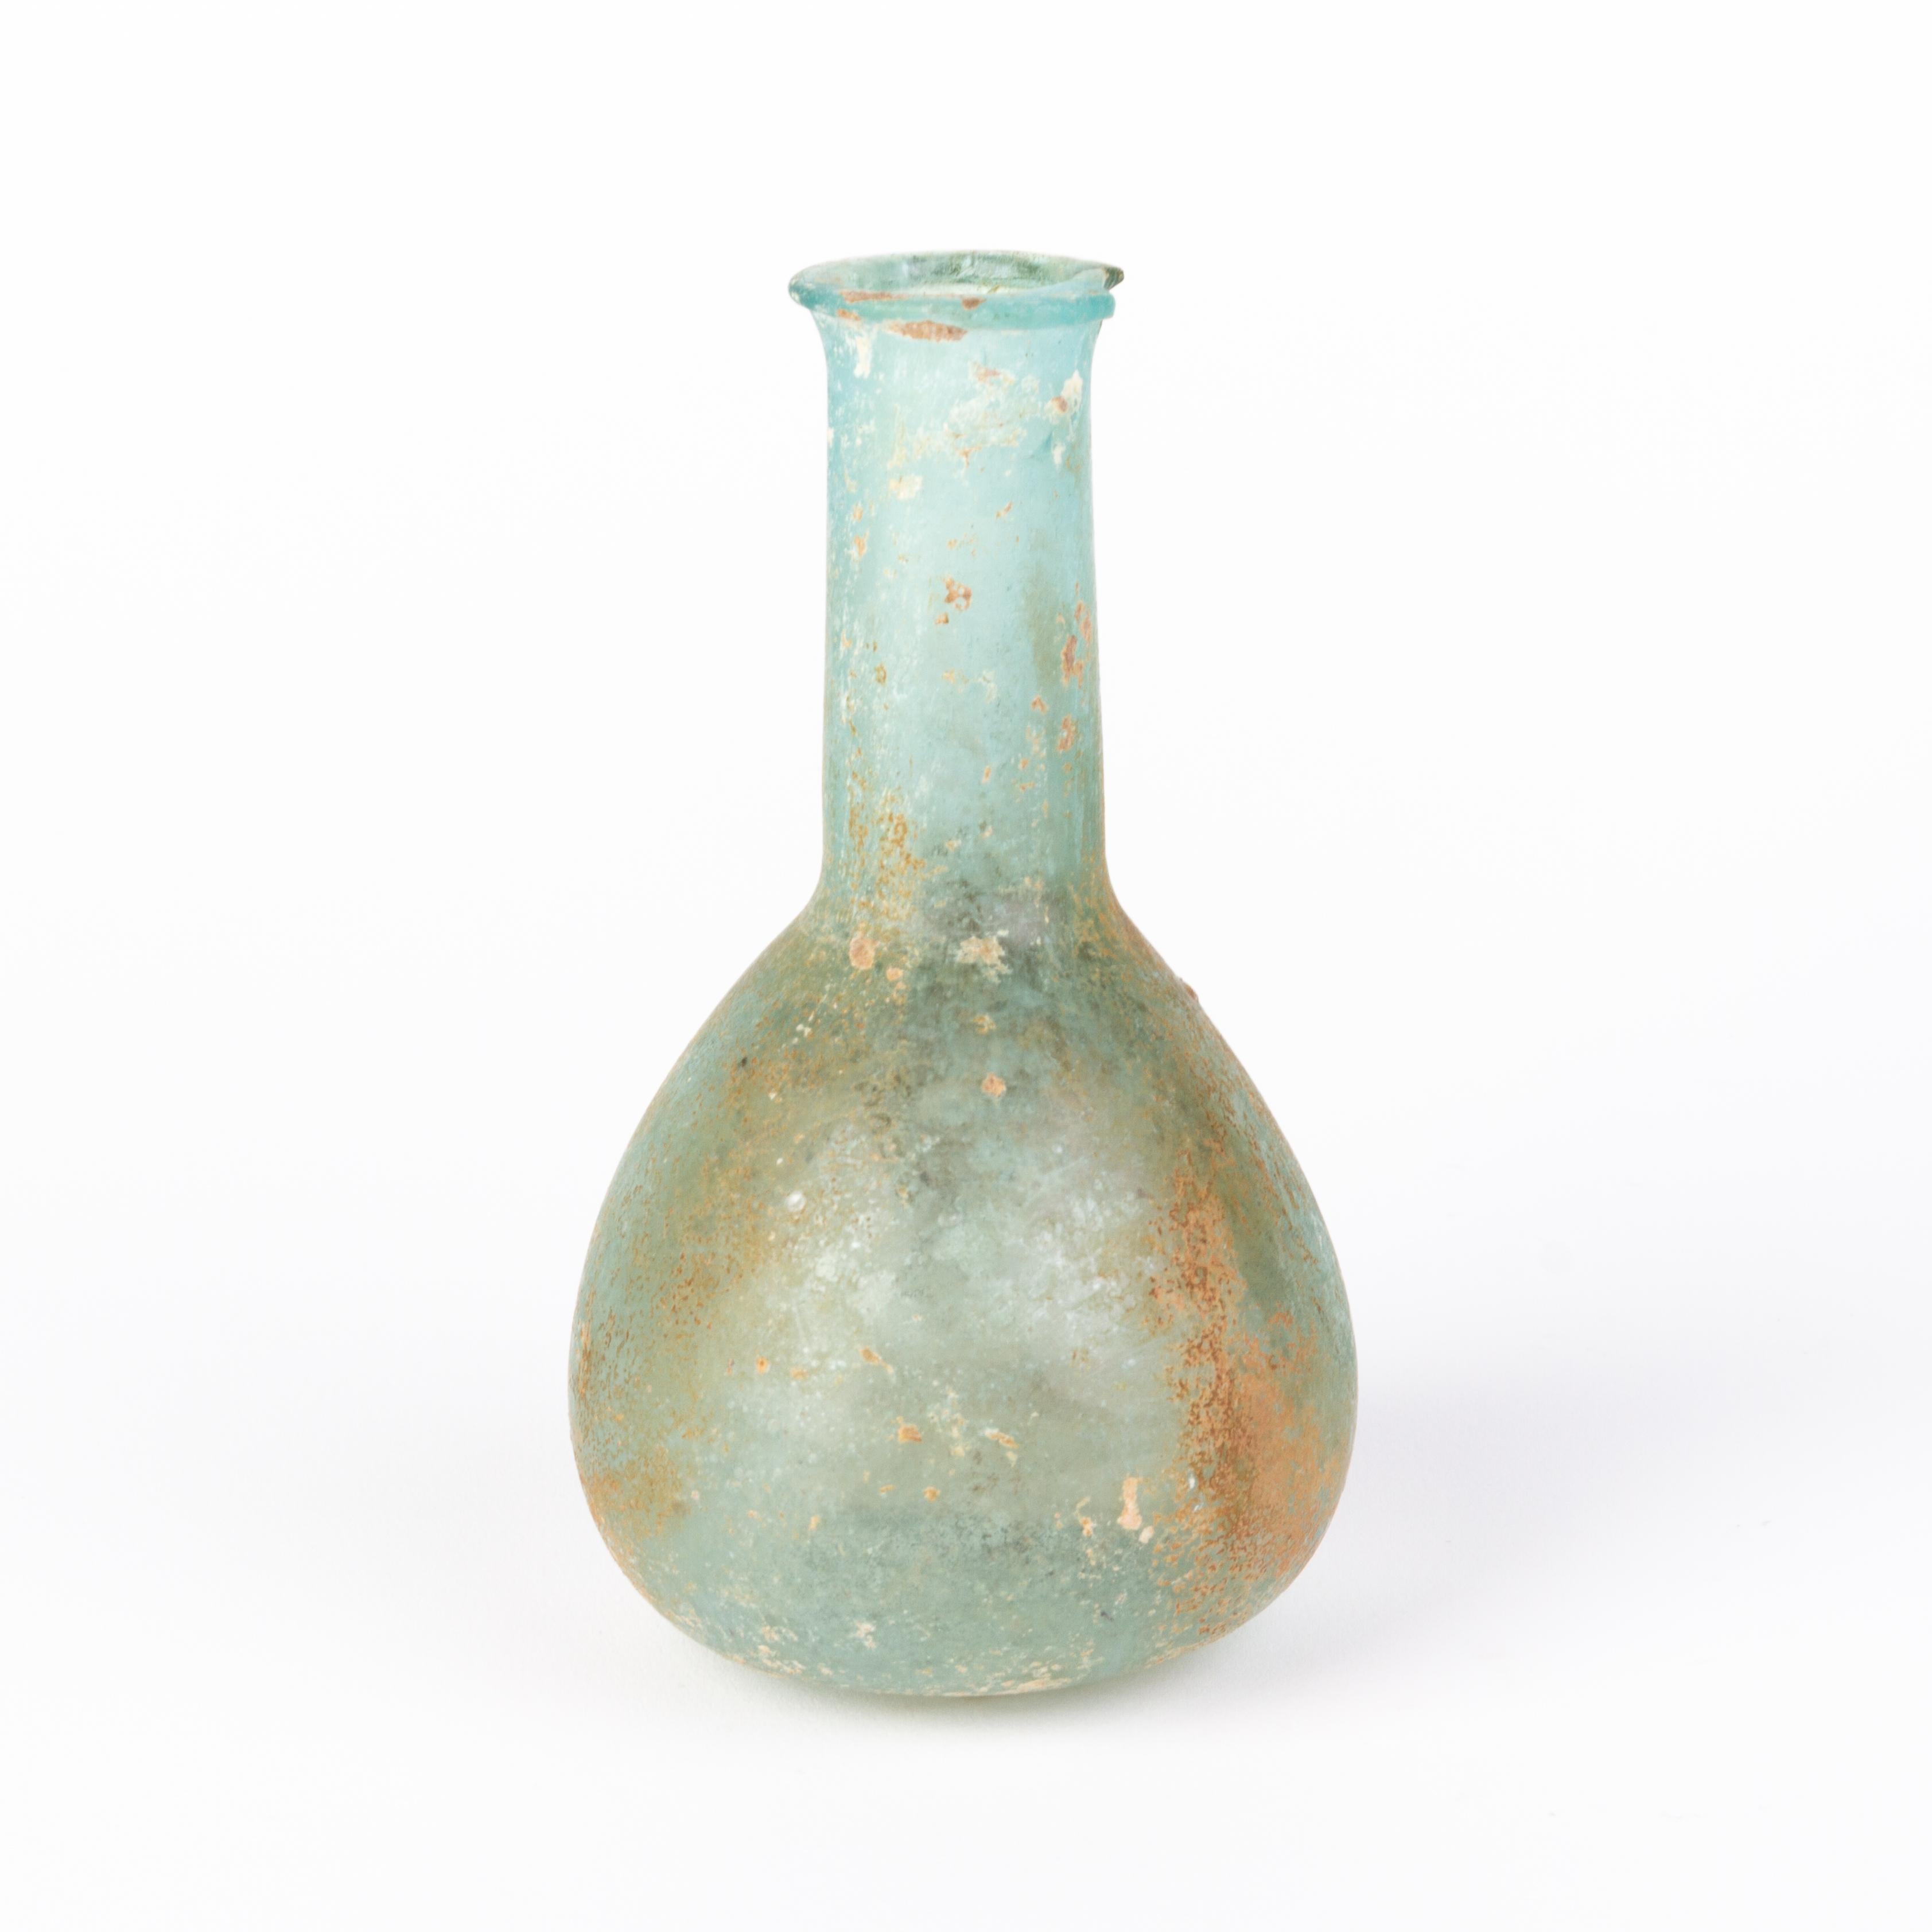 Ancient Roman Glass Bottle 
Good condition for age, as seen.
Free international shipping.